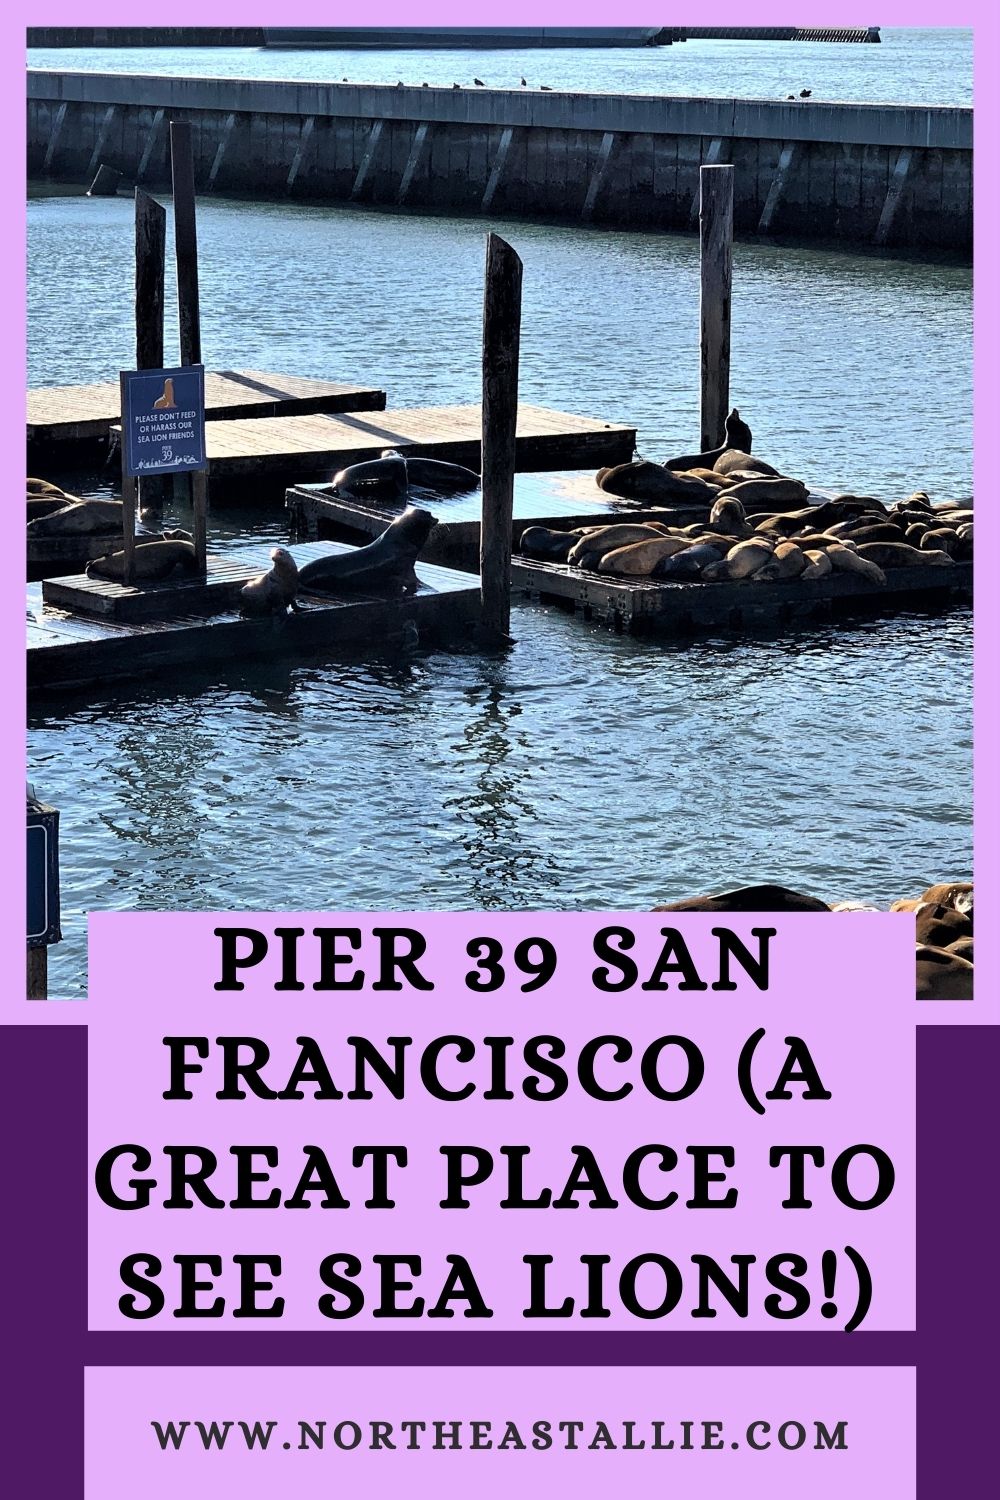 Pier 39 San Francisco (A Great Place To See Sea Lions!)